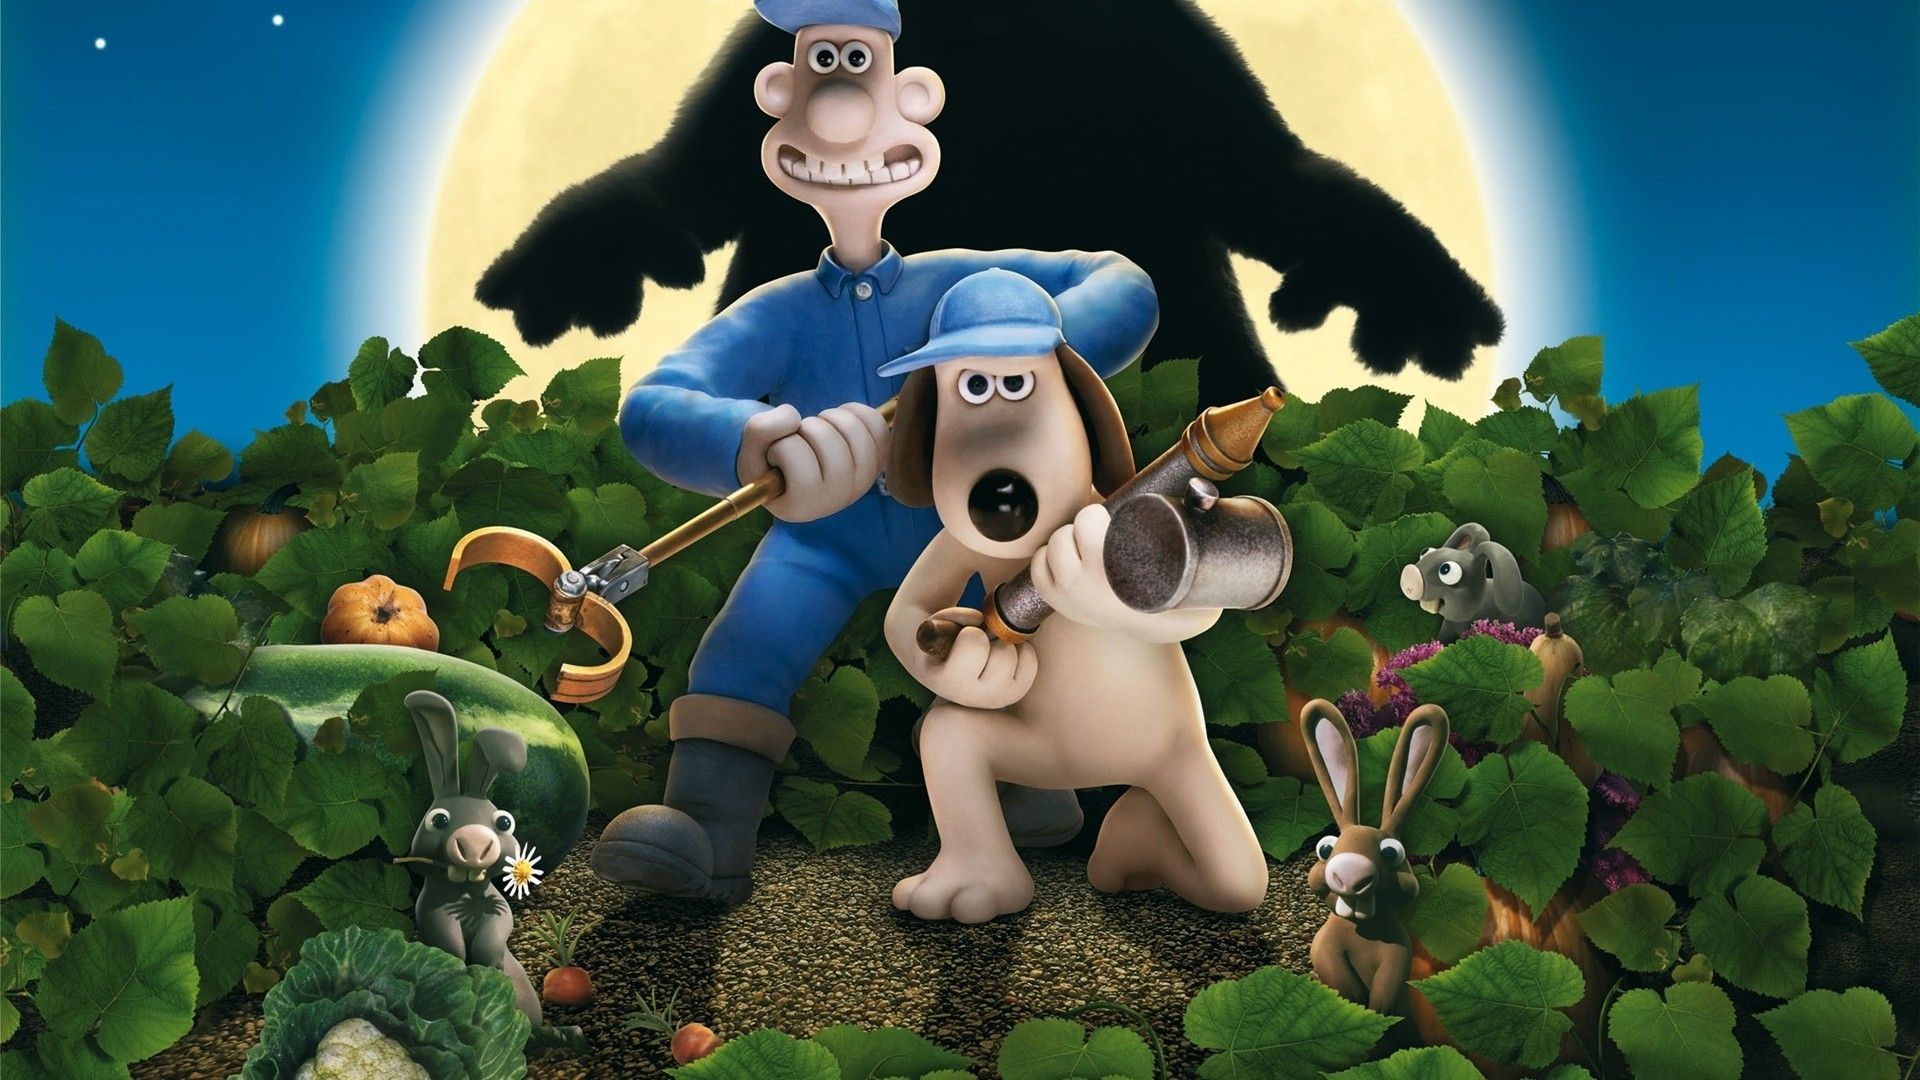 Wallace & Gromit: The Curse of the Were-Rabbit background